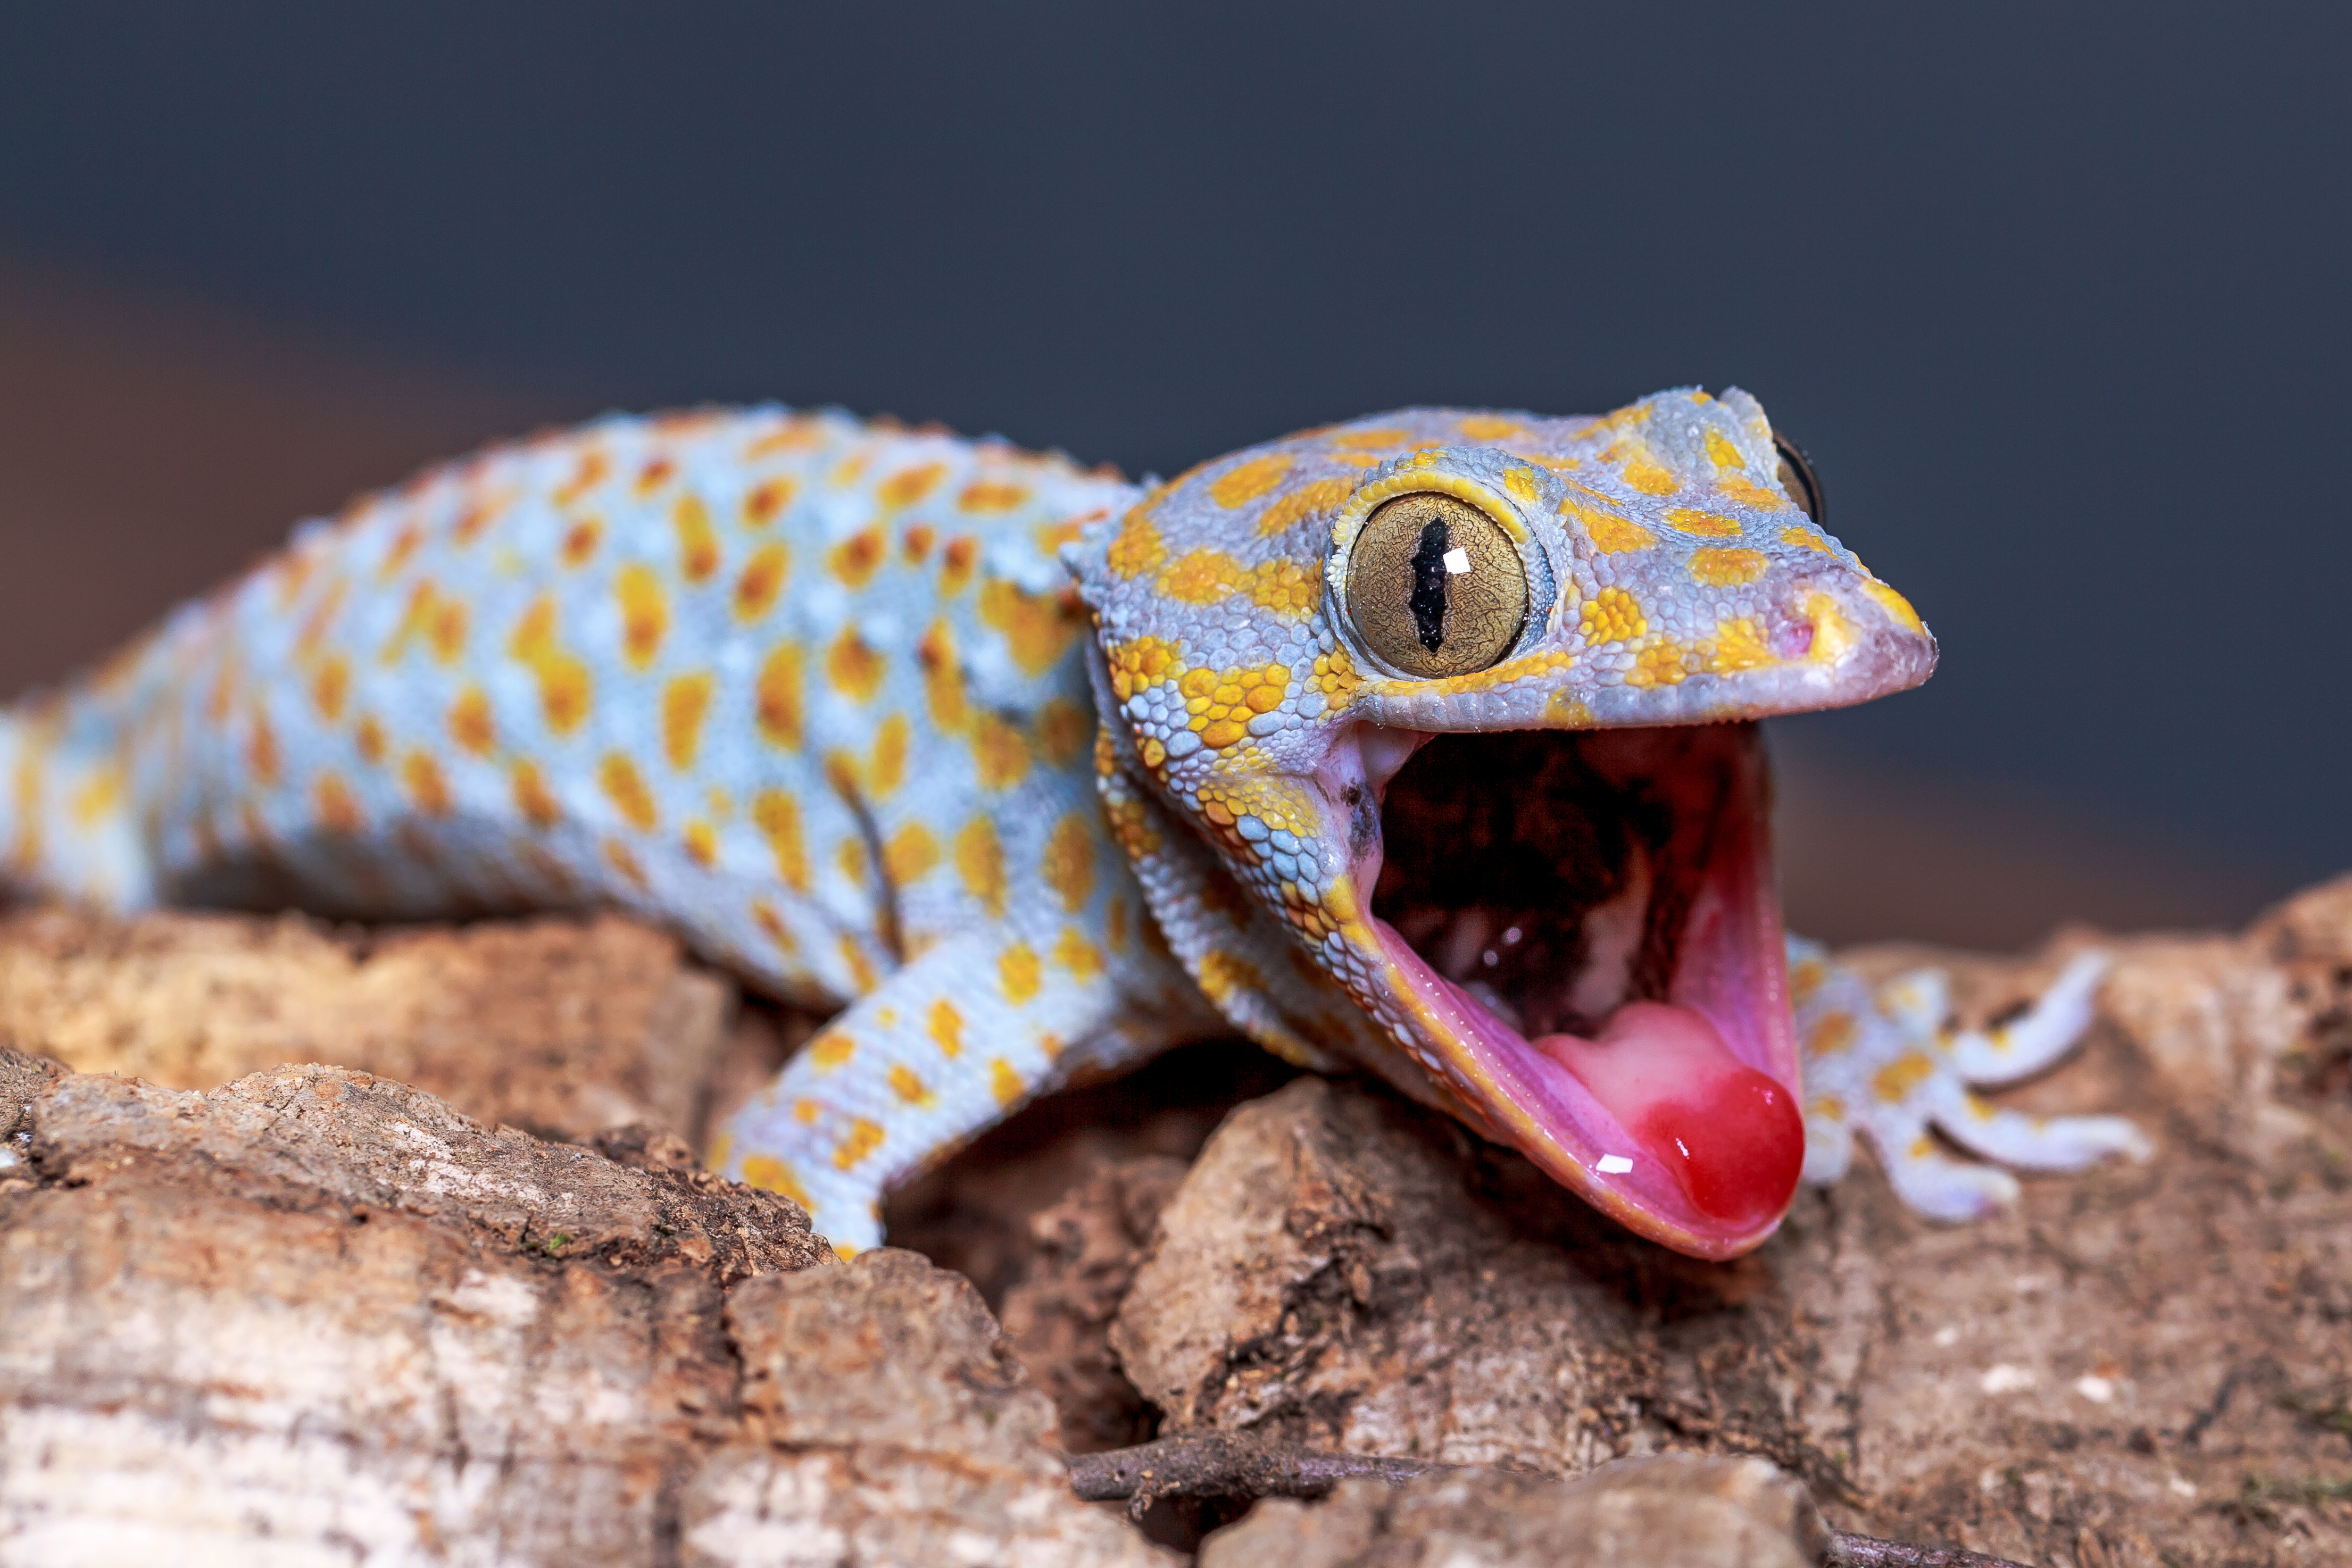 Pupil enables clear vision in extreme light conditions : Tokay Gecko